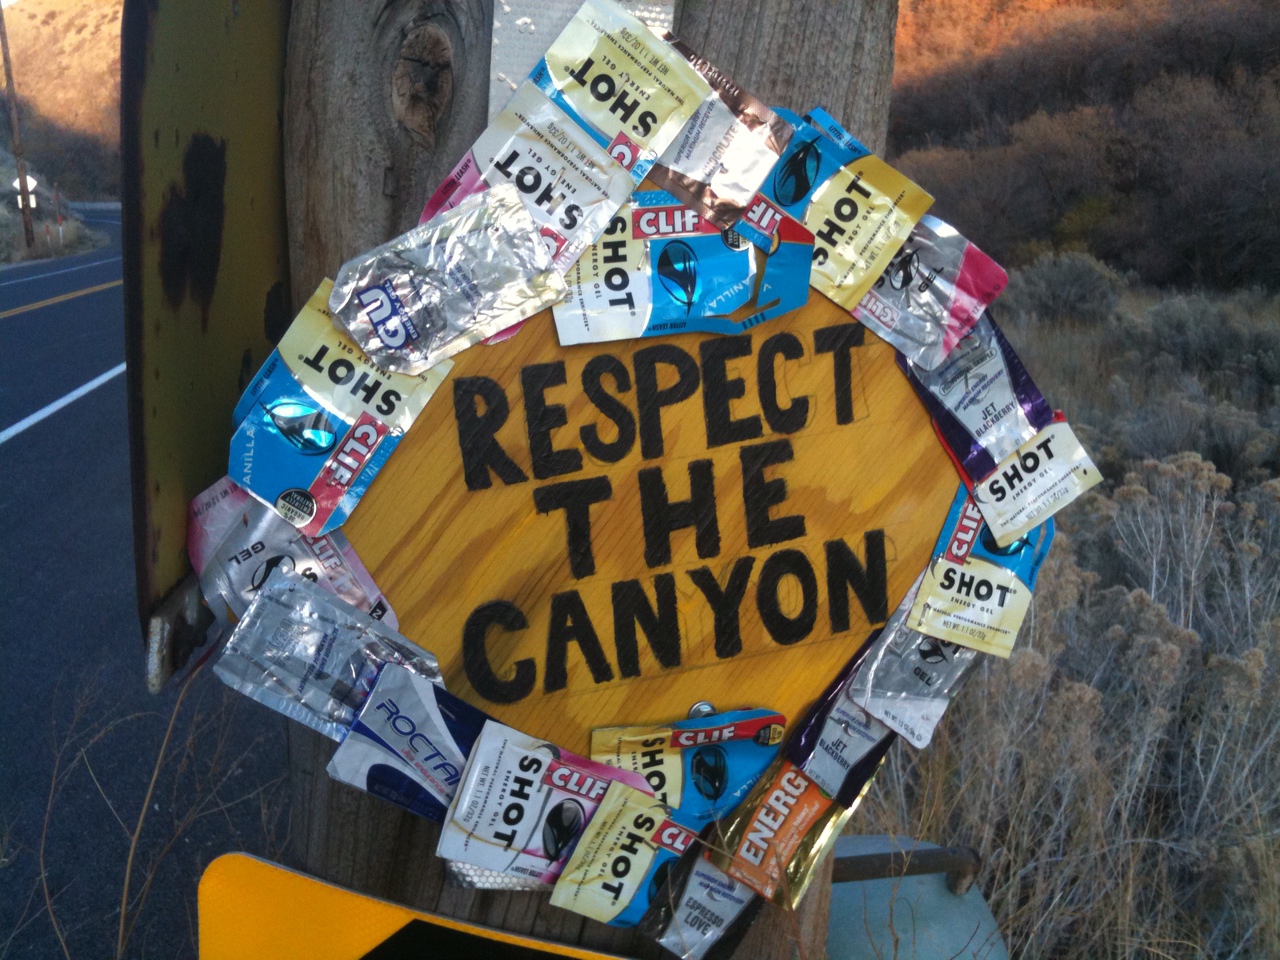 Cyclists are encouraged to keep Emigration Canyon clean. Photo by Dave Iltis